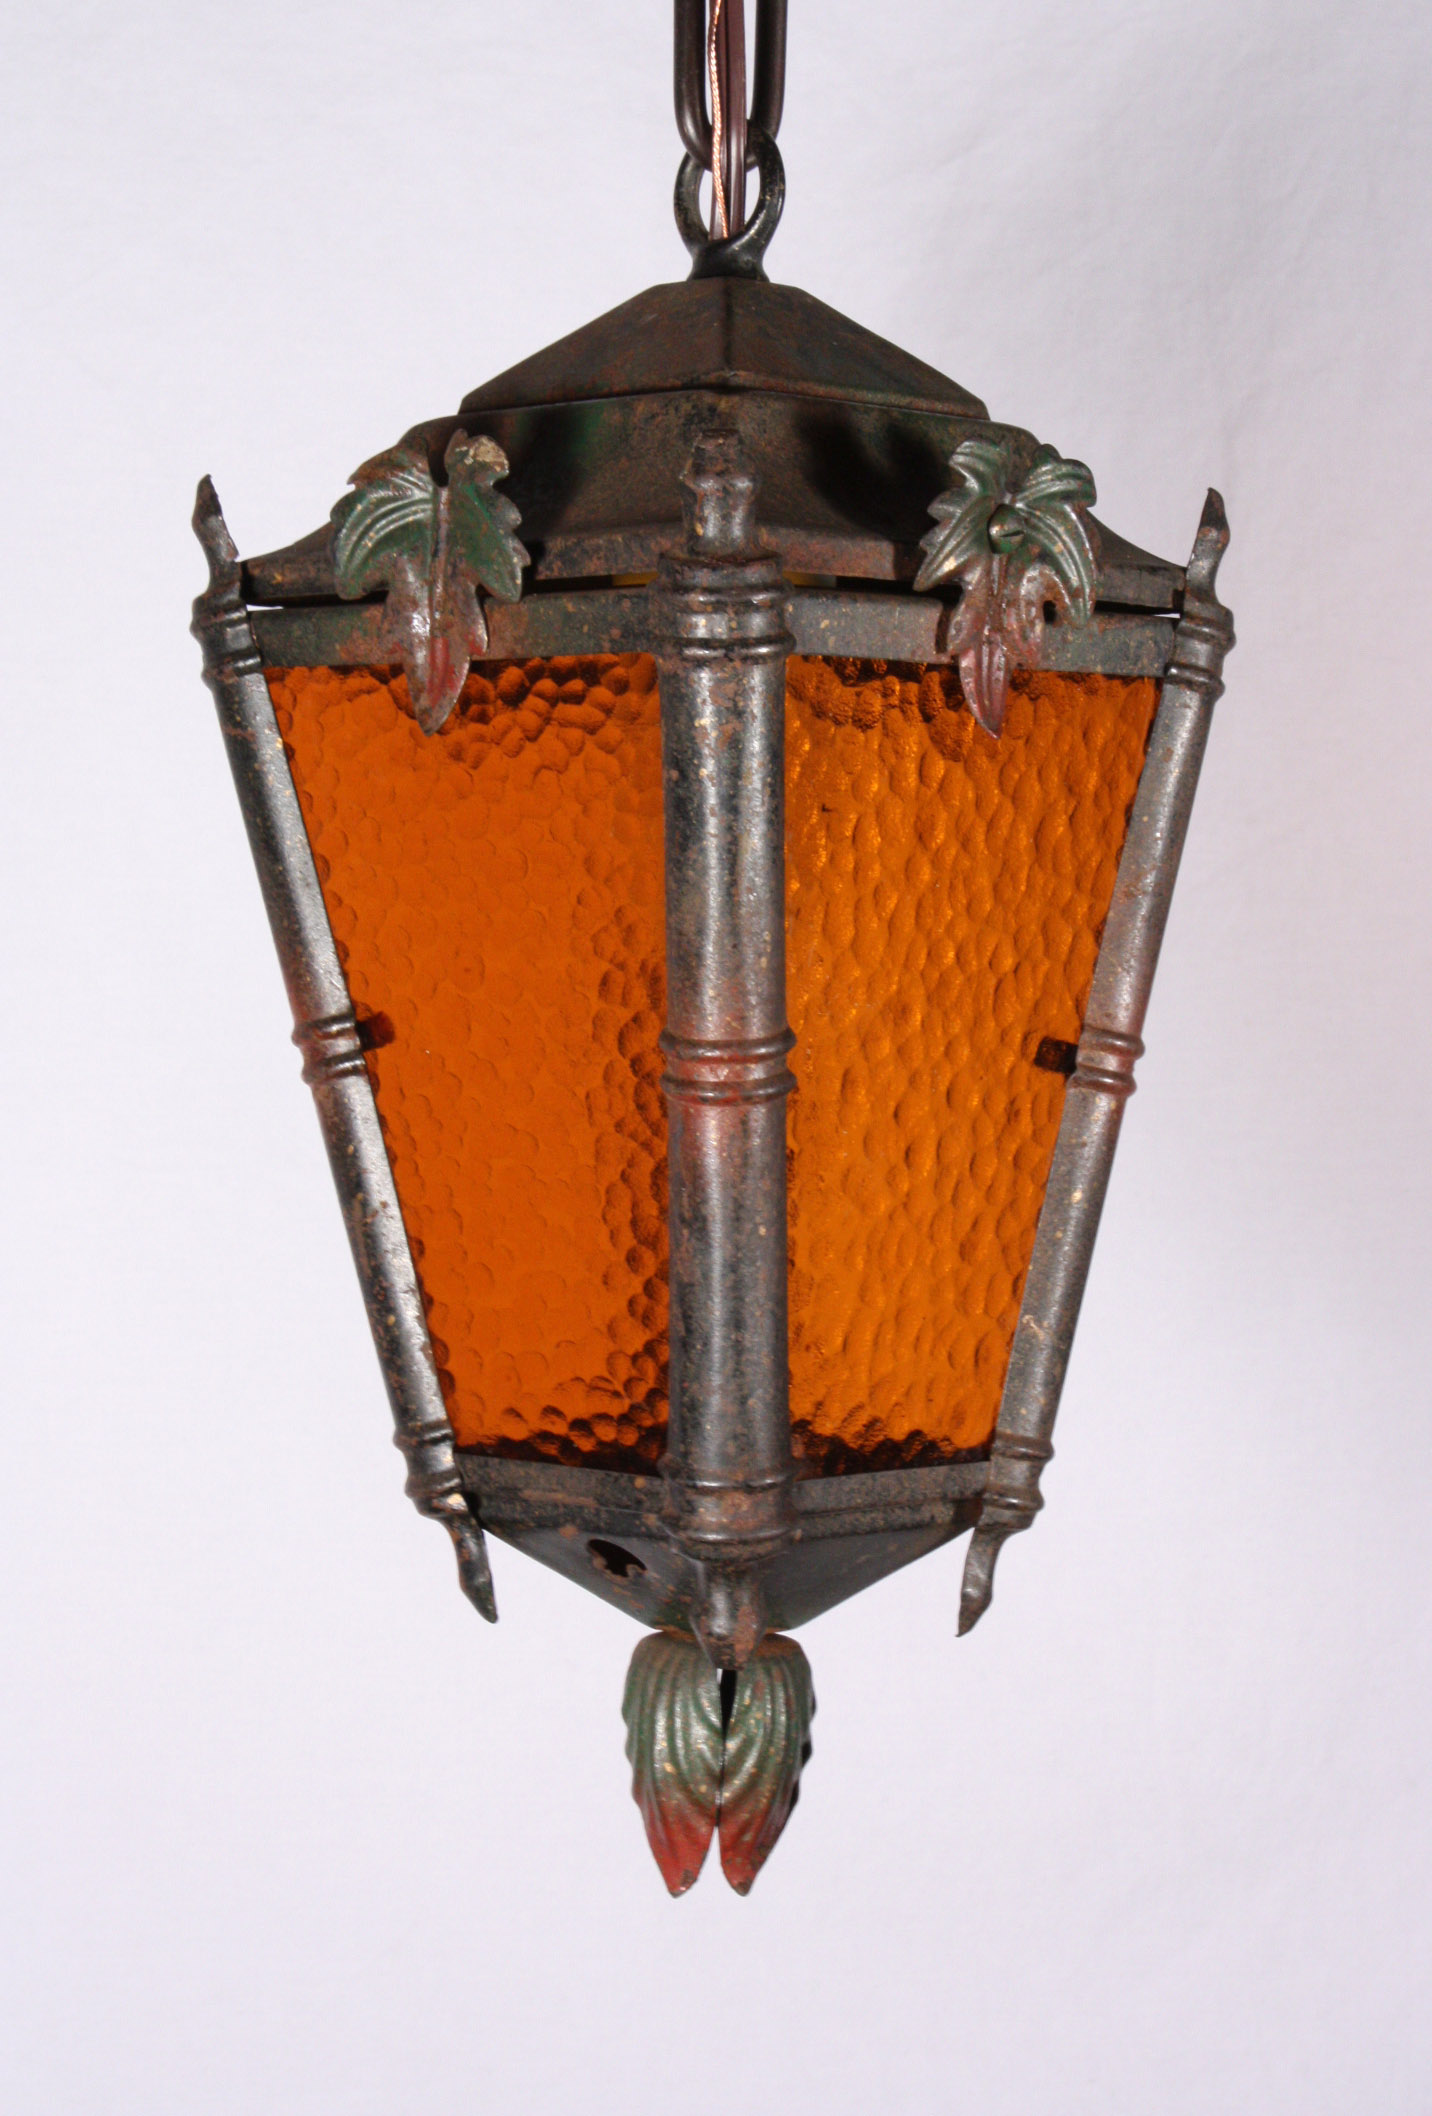 SOLD Delightful Antique Lantern with Maple Leaves, Original Polychrome Finish, c. 1920’s-21010